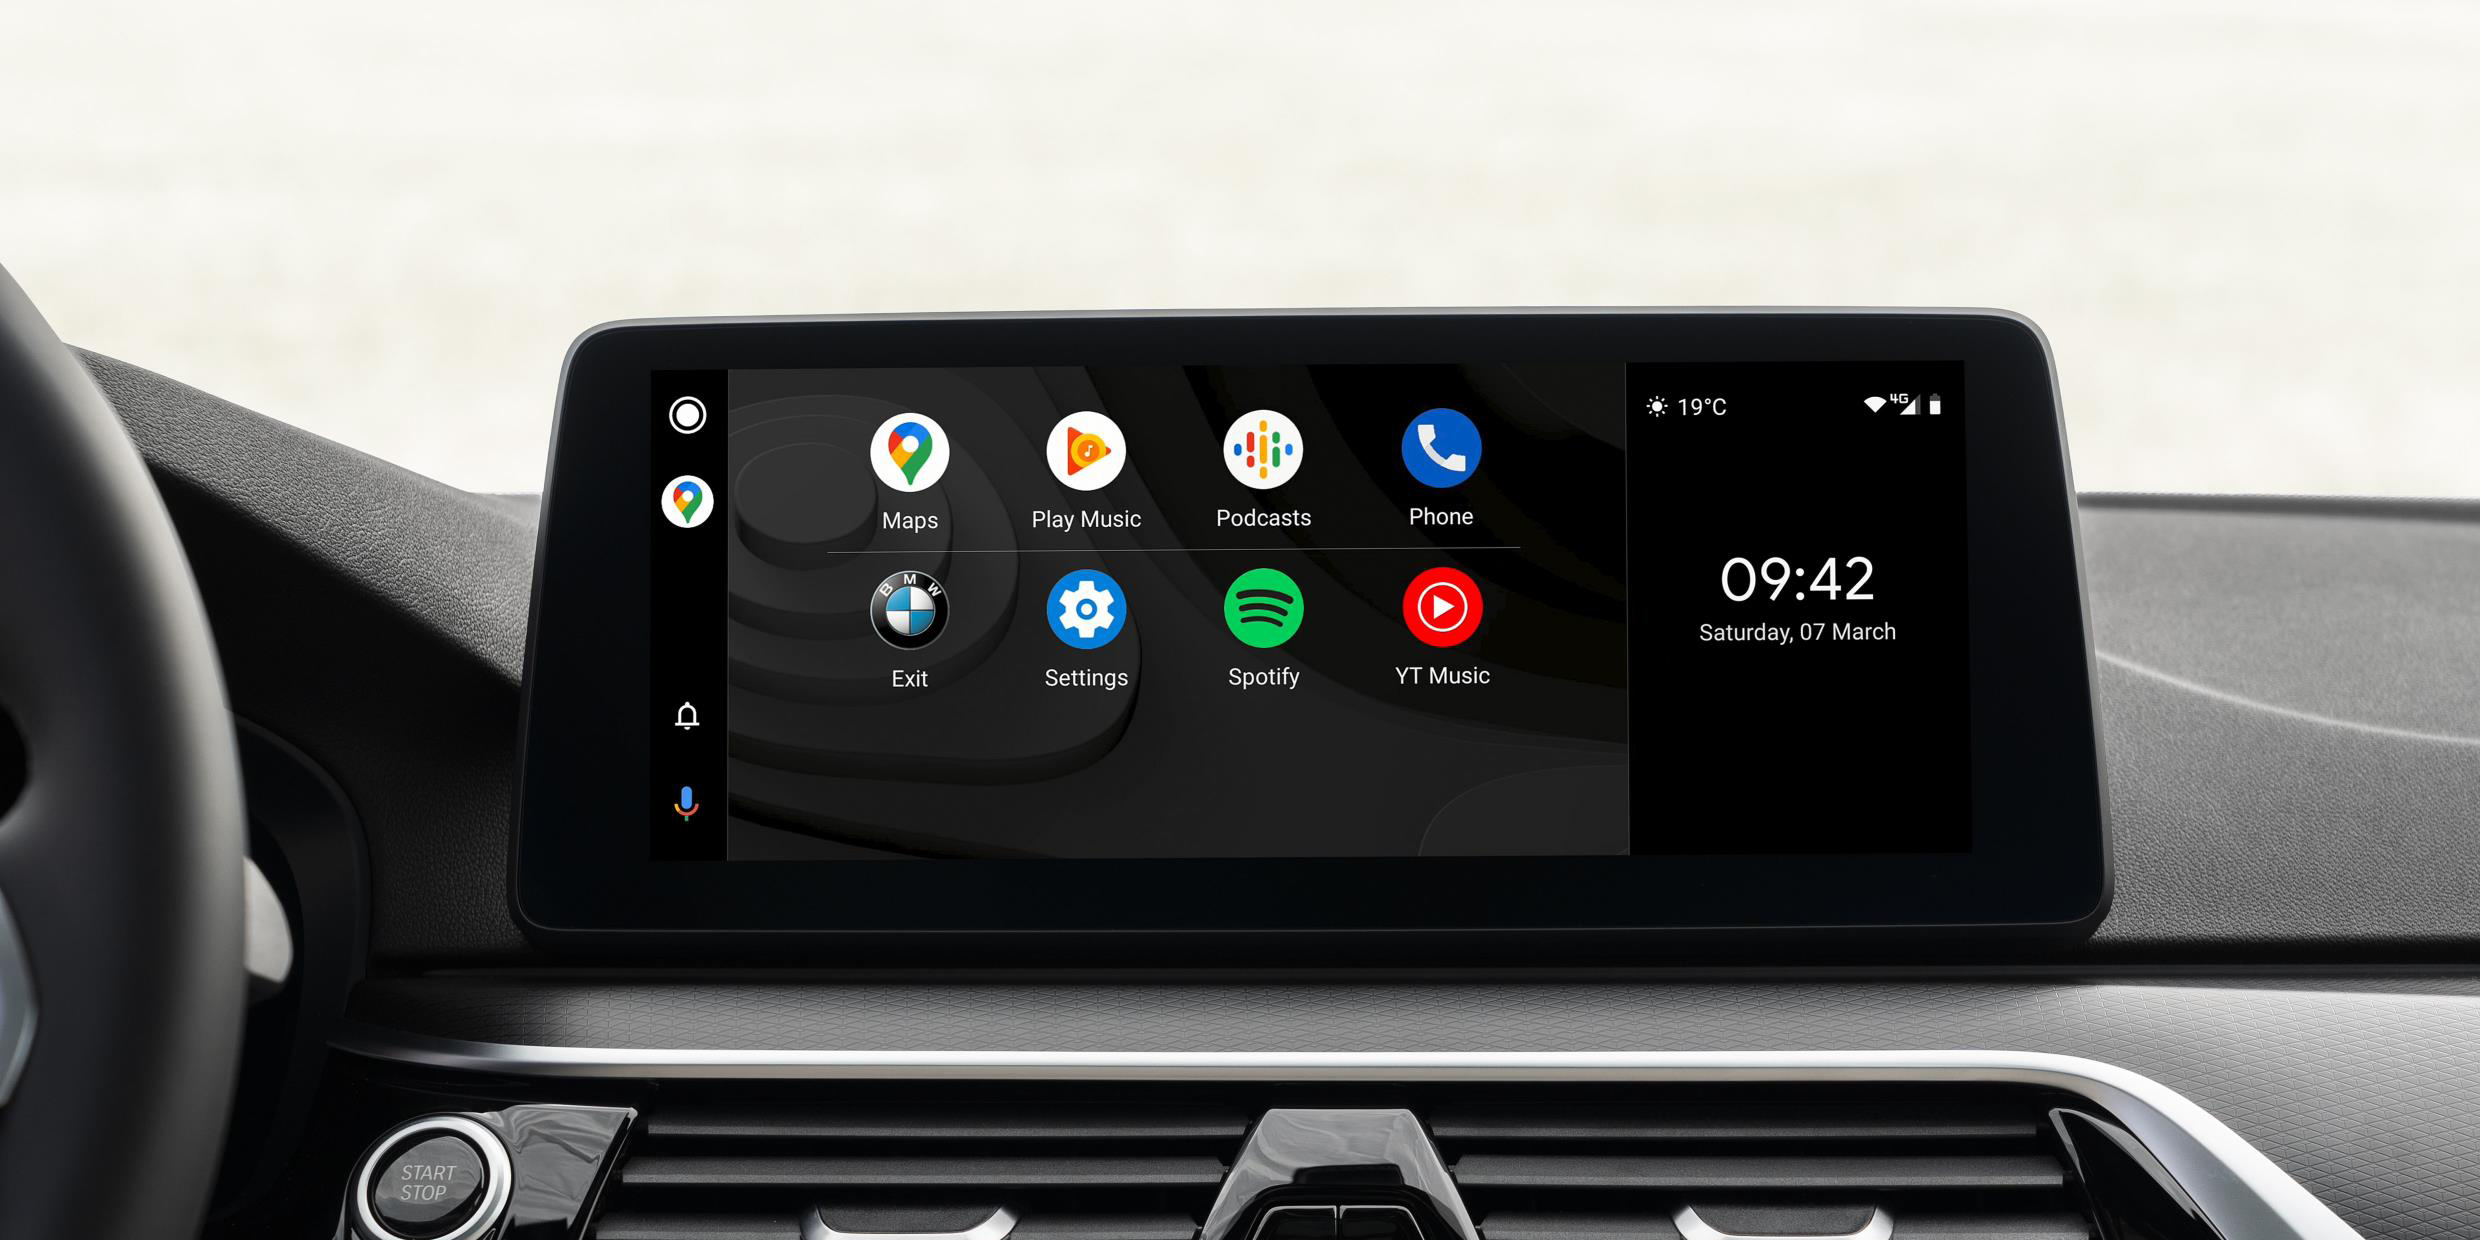 Google Rolls Out Wireless Android Auto, but Almost No One Can Use It